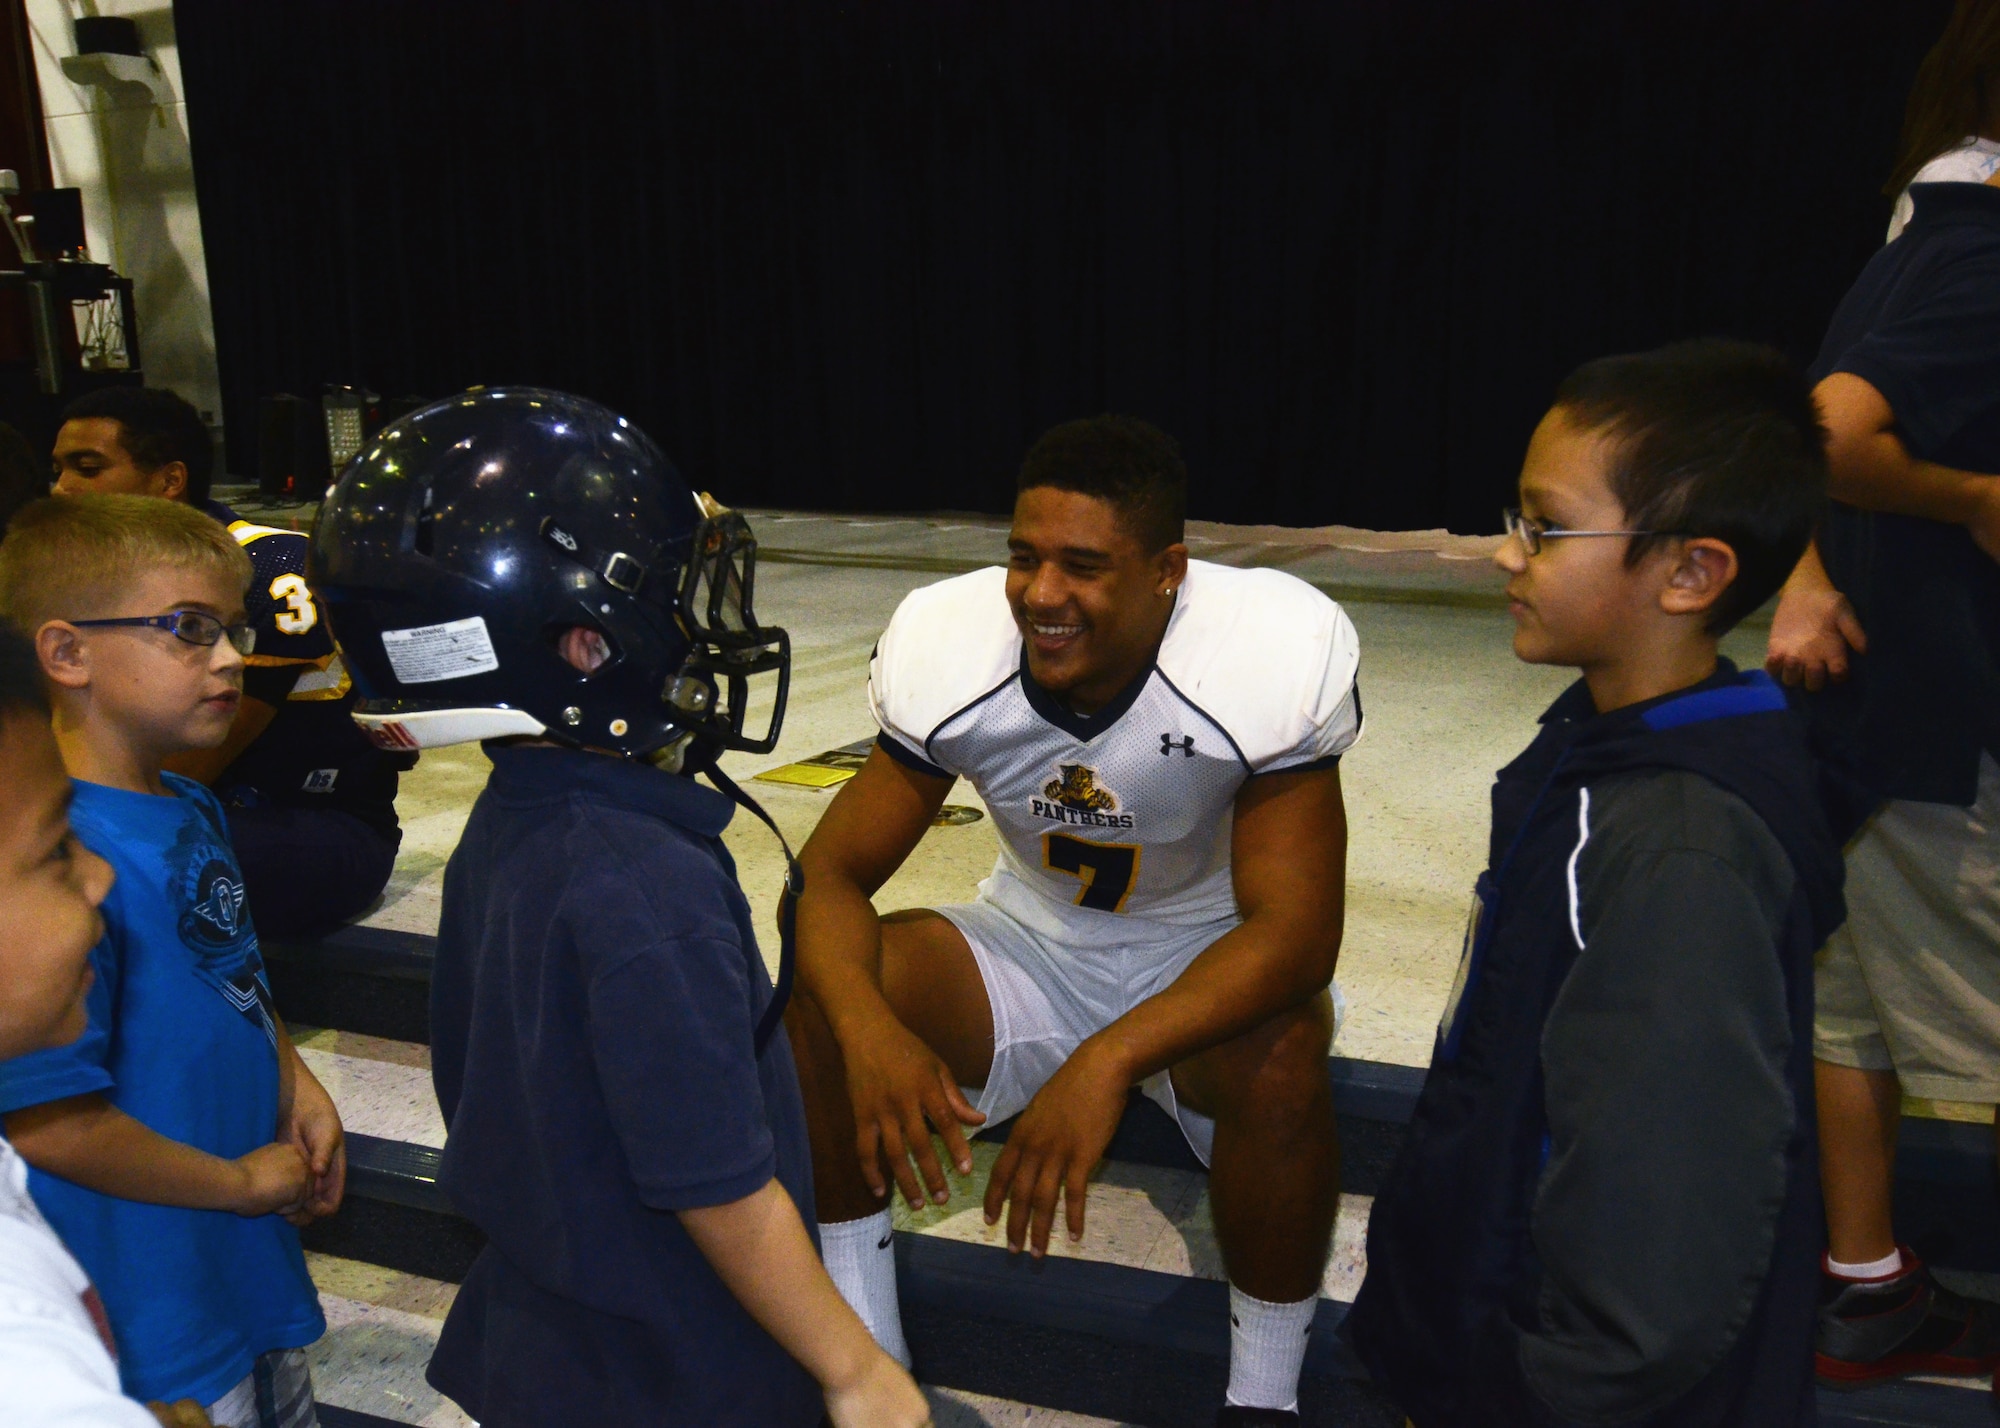 Guam High School football team member, Tegan Brown, talks to students during an anti-bullying ceremony, Oct. 17, 2013, at Andersen Elementary School, on Andersen Air Force Base, Guam.  Members of the football team visited different classes throughout the school, and spoke about how to prevent and report anti-bullying. (U.S. Air Force photo by Senior Airman Cierra Presentado/Released)